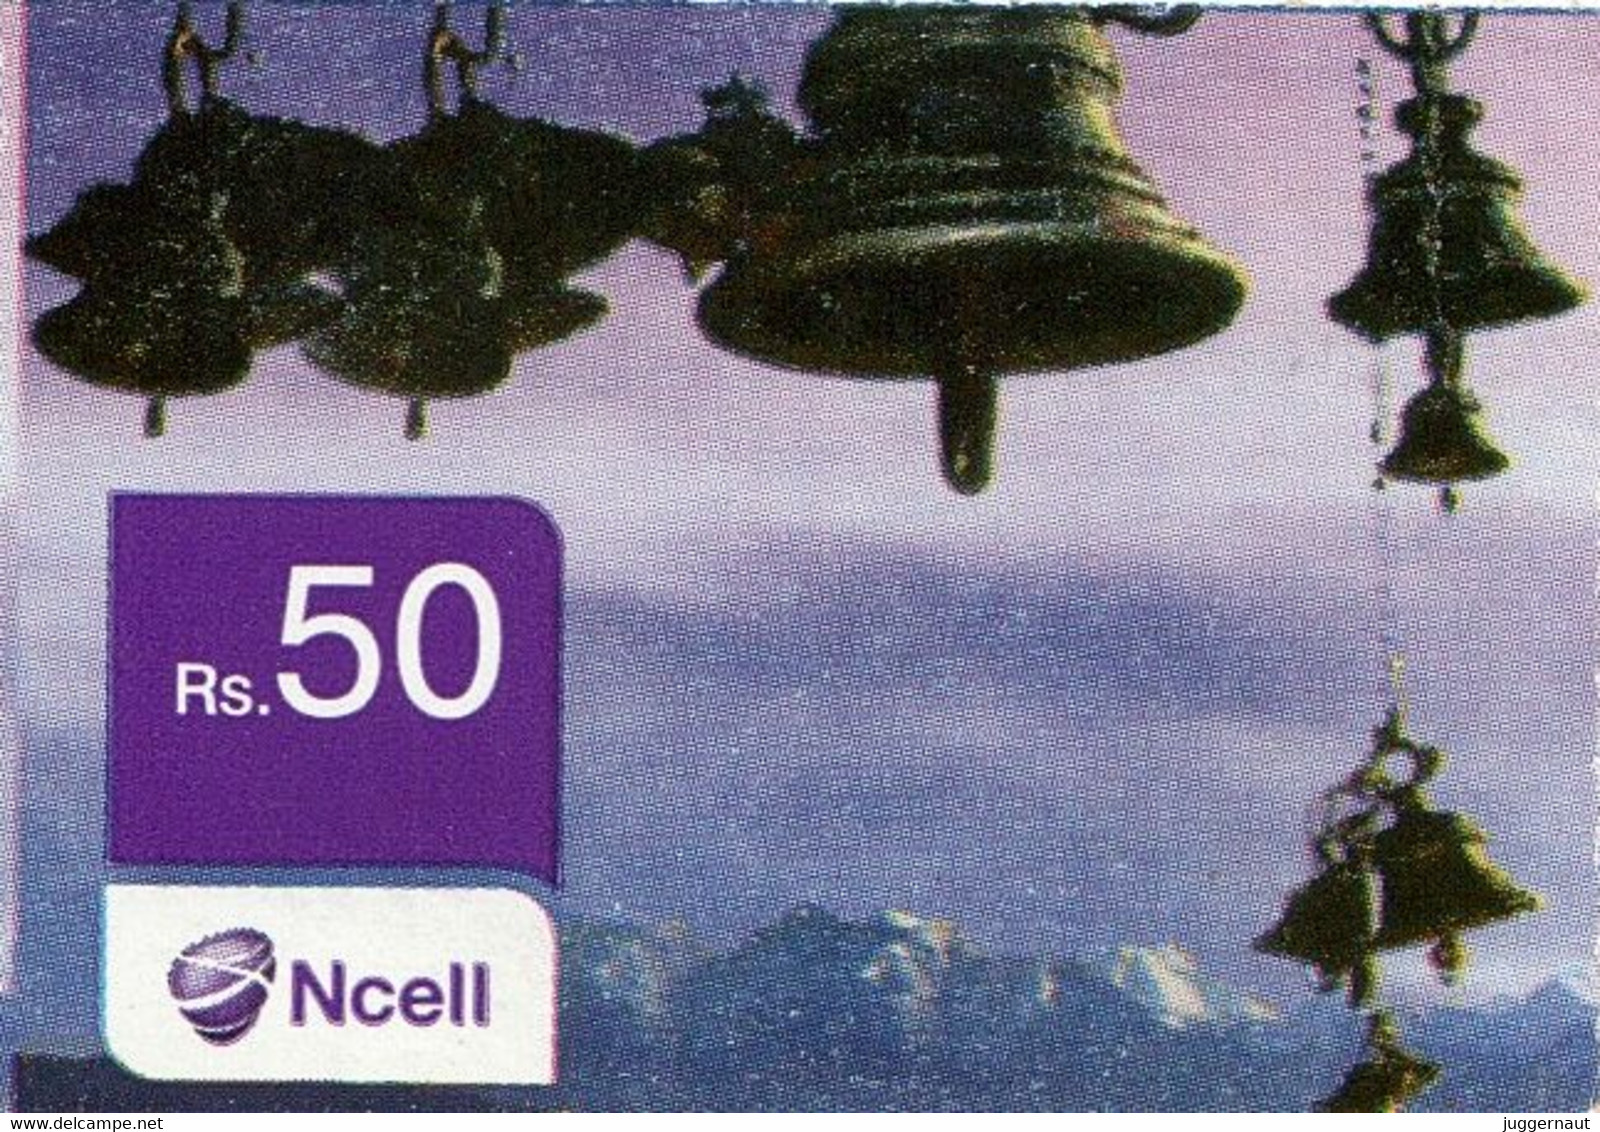 GSM MOBILE PHONE  Rs.50 PREPAID Used MINI RECHARGE CARD NCELL NEPAL - Nepal